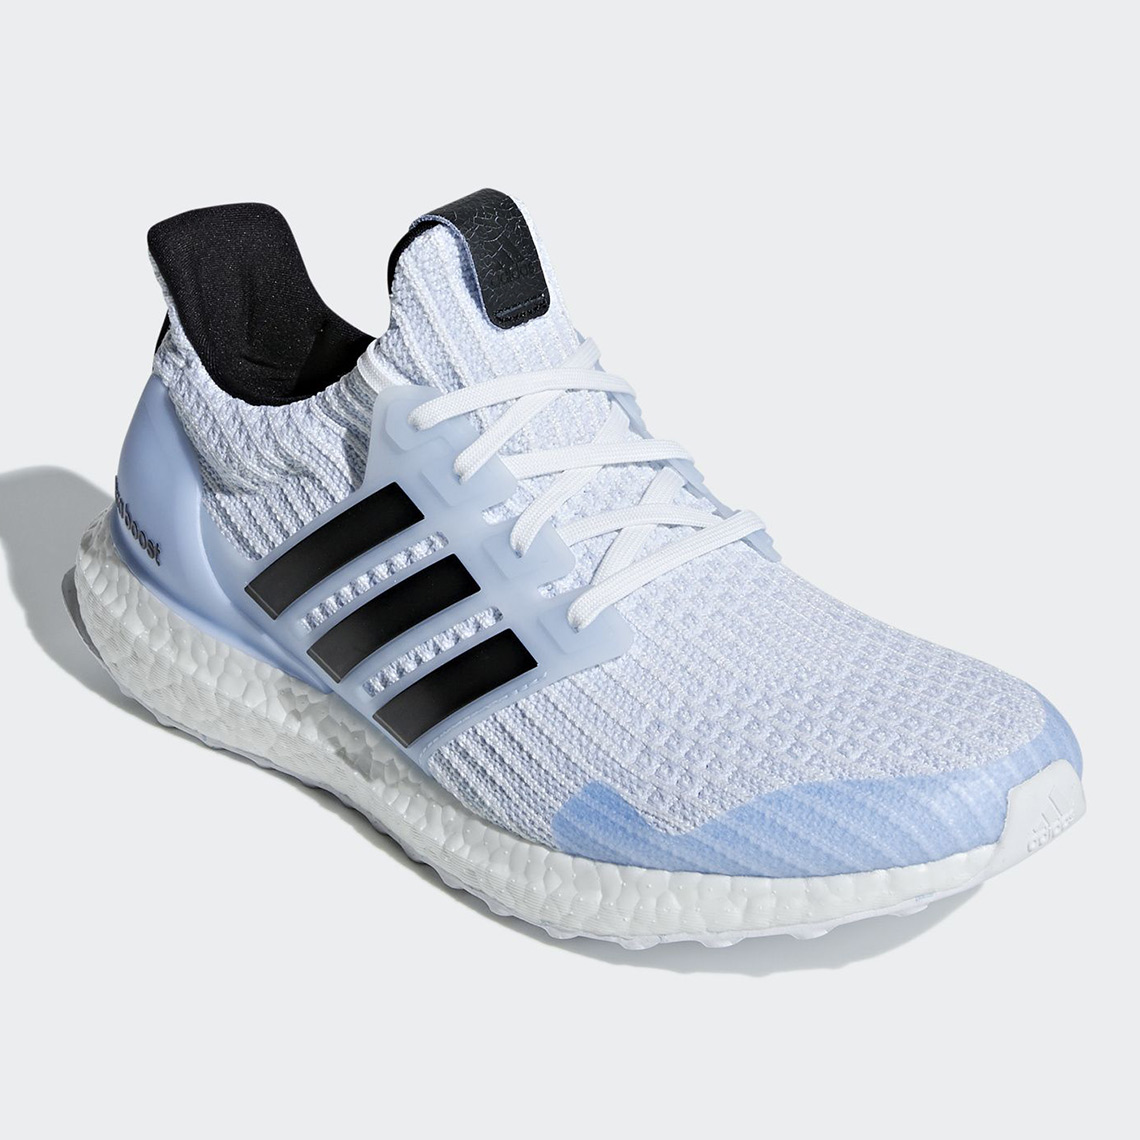 game of thrones adidas ultra boost price